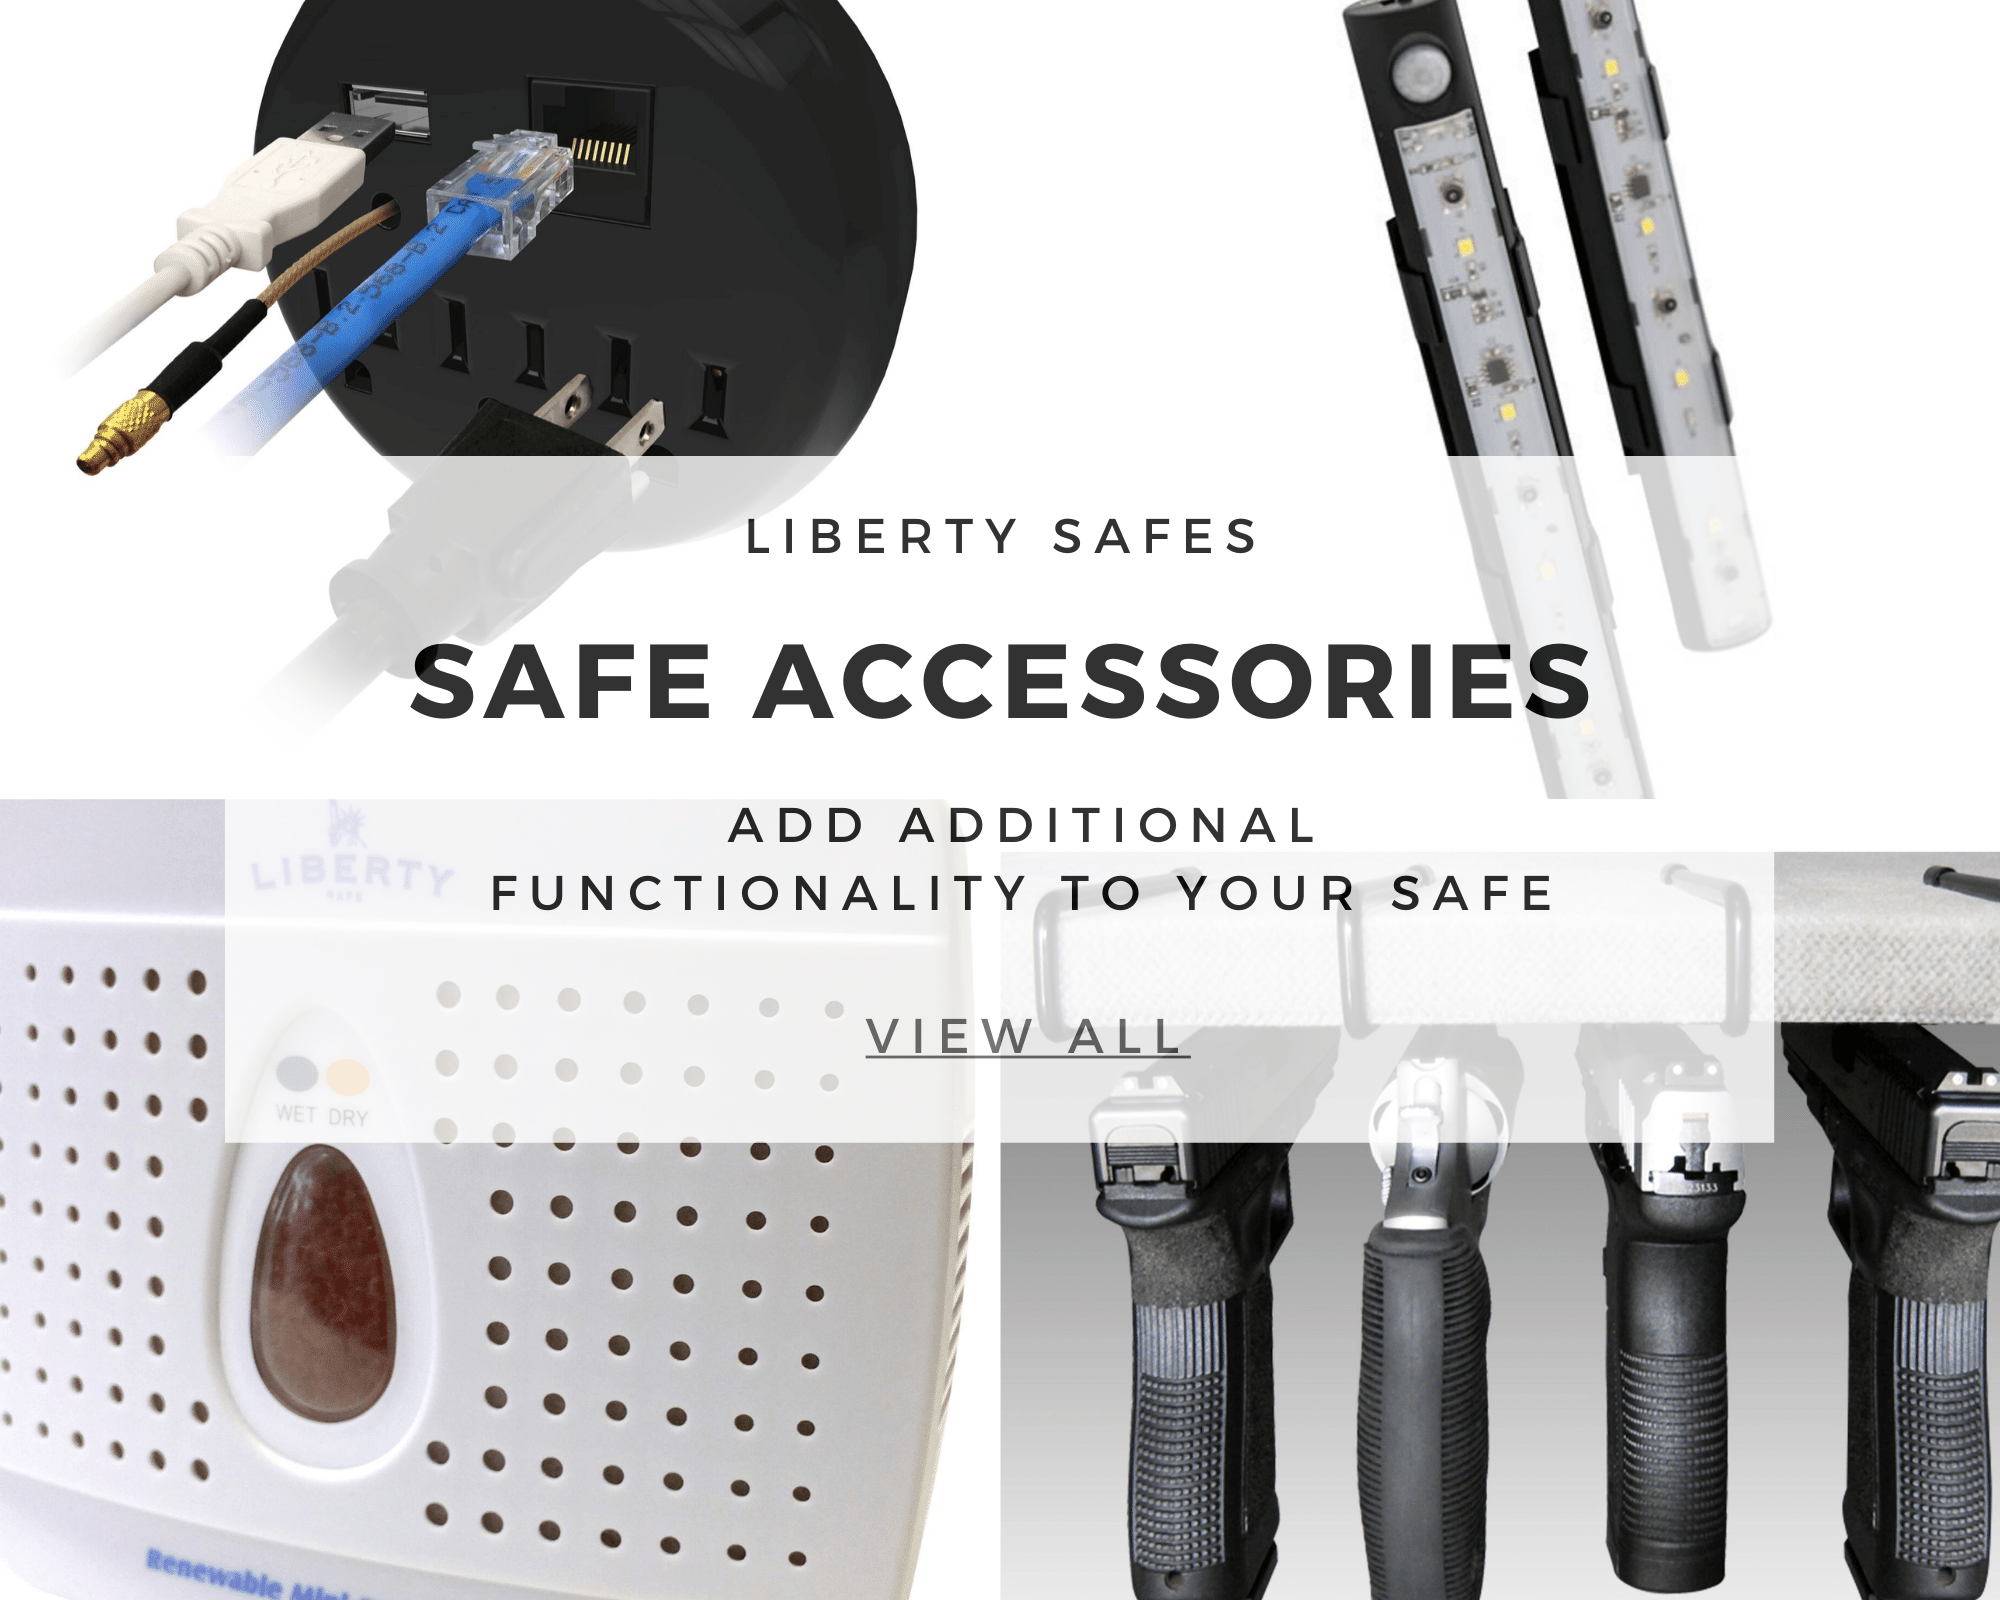 Accessories - Upgrade your safe